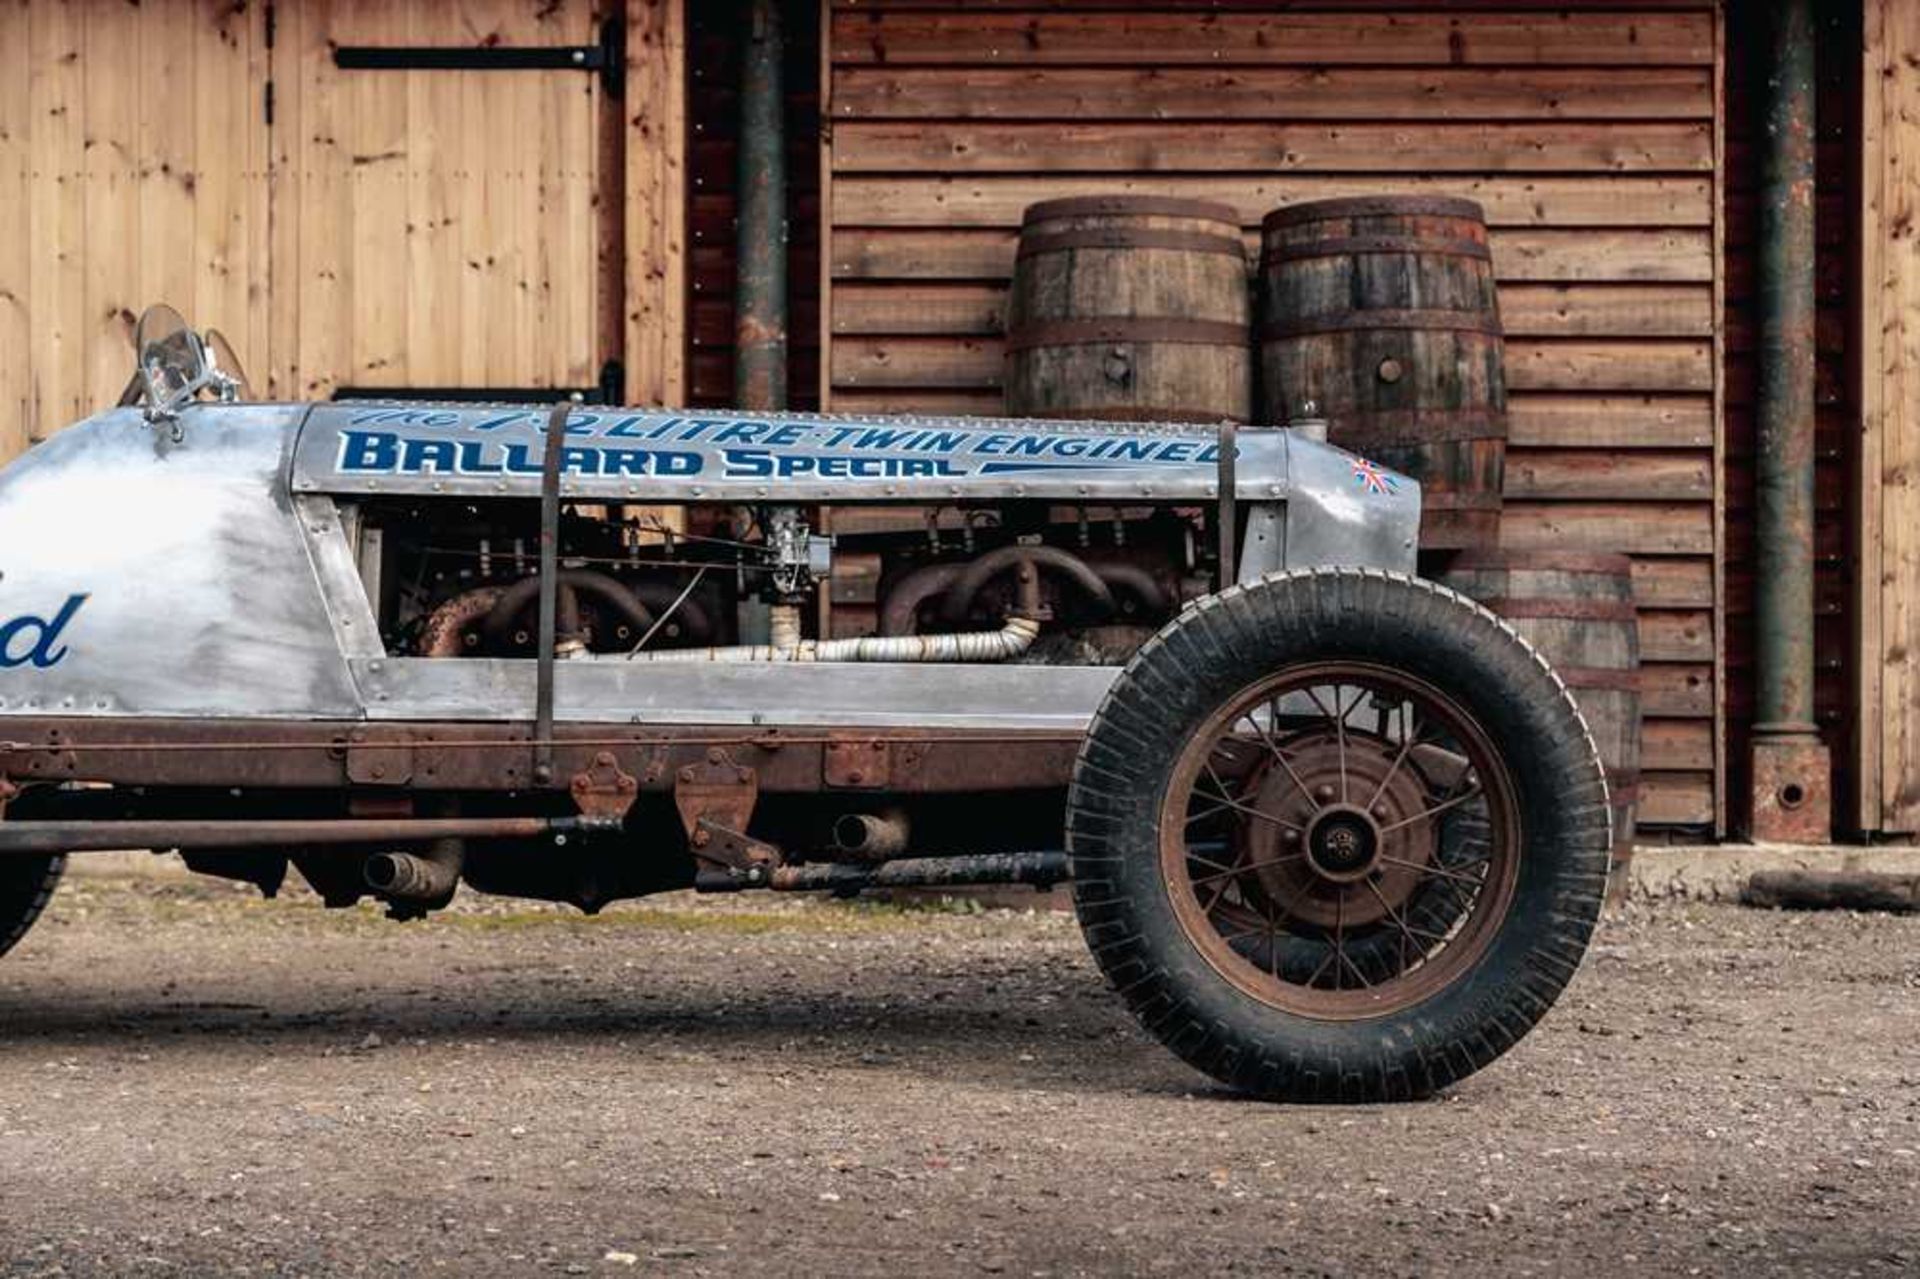 1930 Ford Model A "The Ballard Special" Speedster One off, bespoke built twin-engined pre-war racing - Image 14 of 94